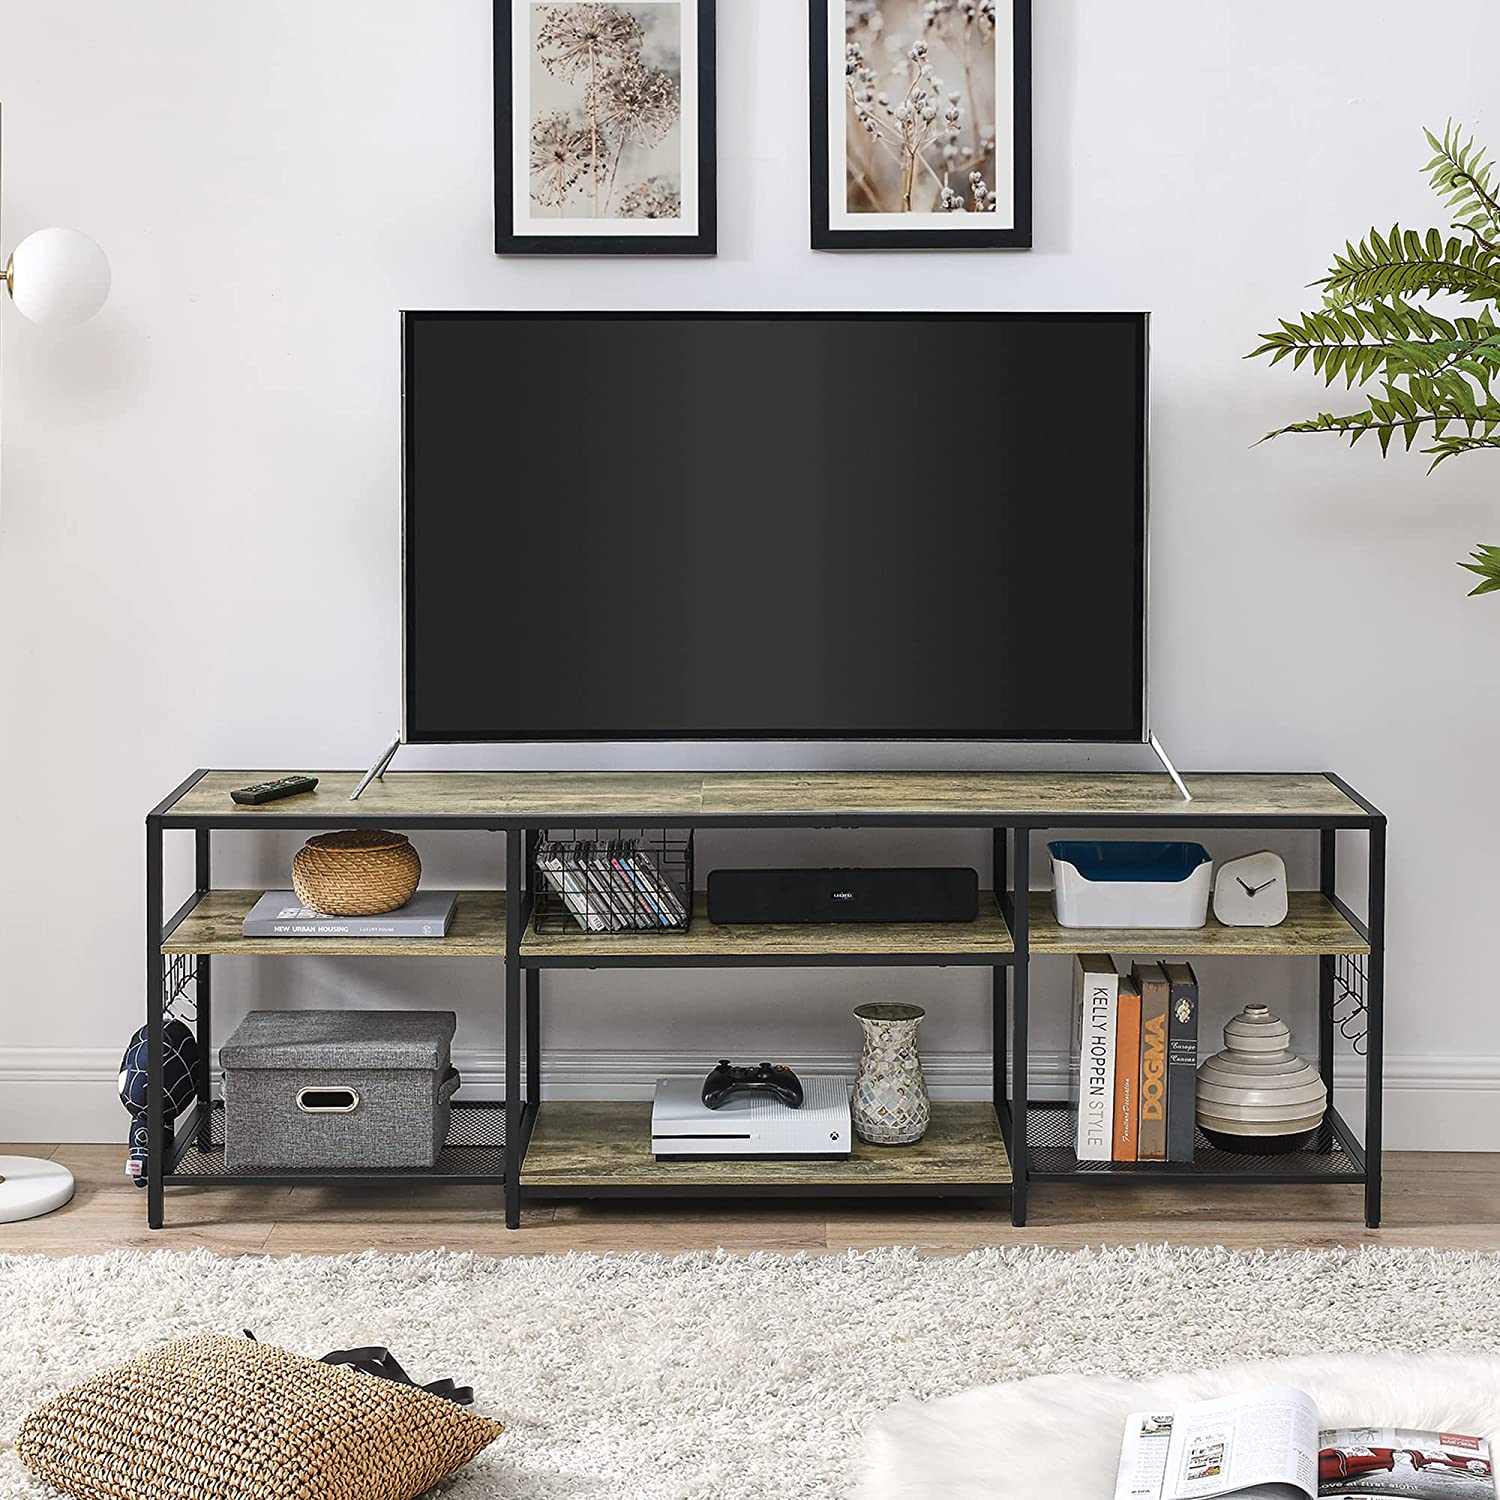 VECELO TV Stand Entertainment Center Media Console with 3-Tier Open Storage Shelves, Cabinet Table with Metal Frame for Living Grey